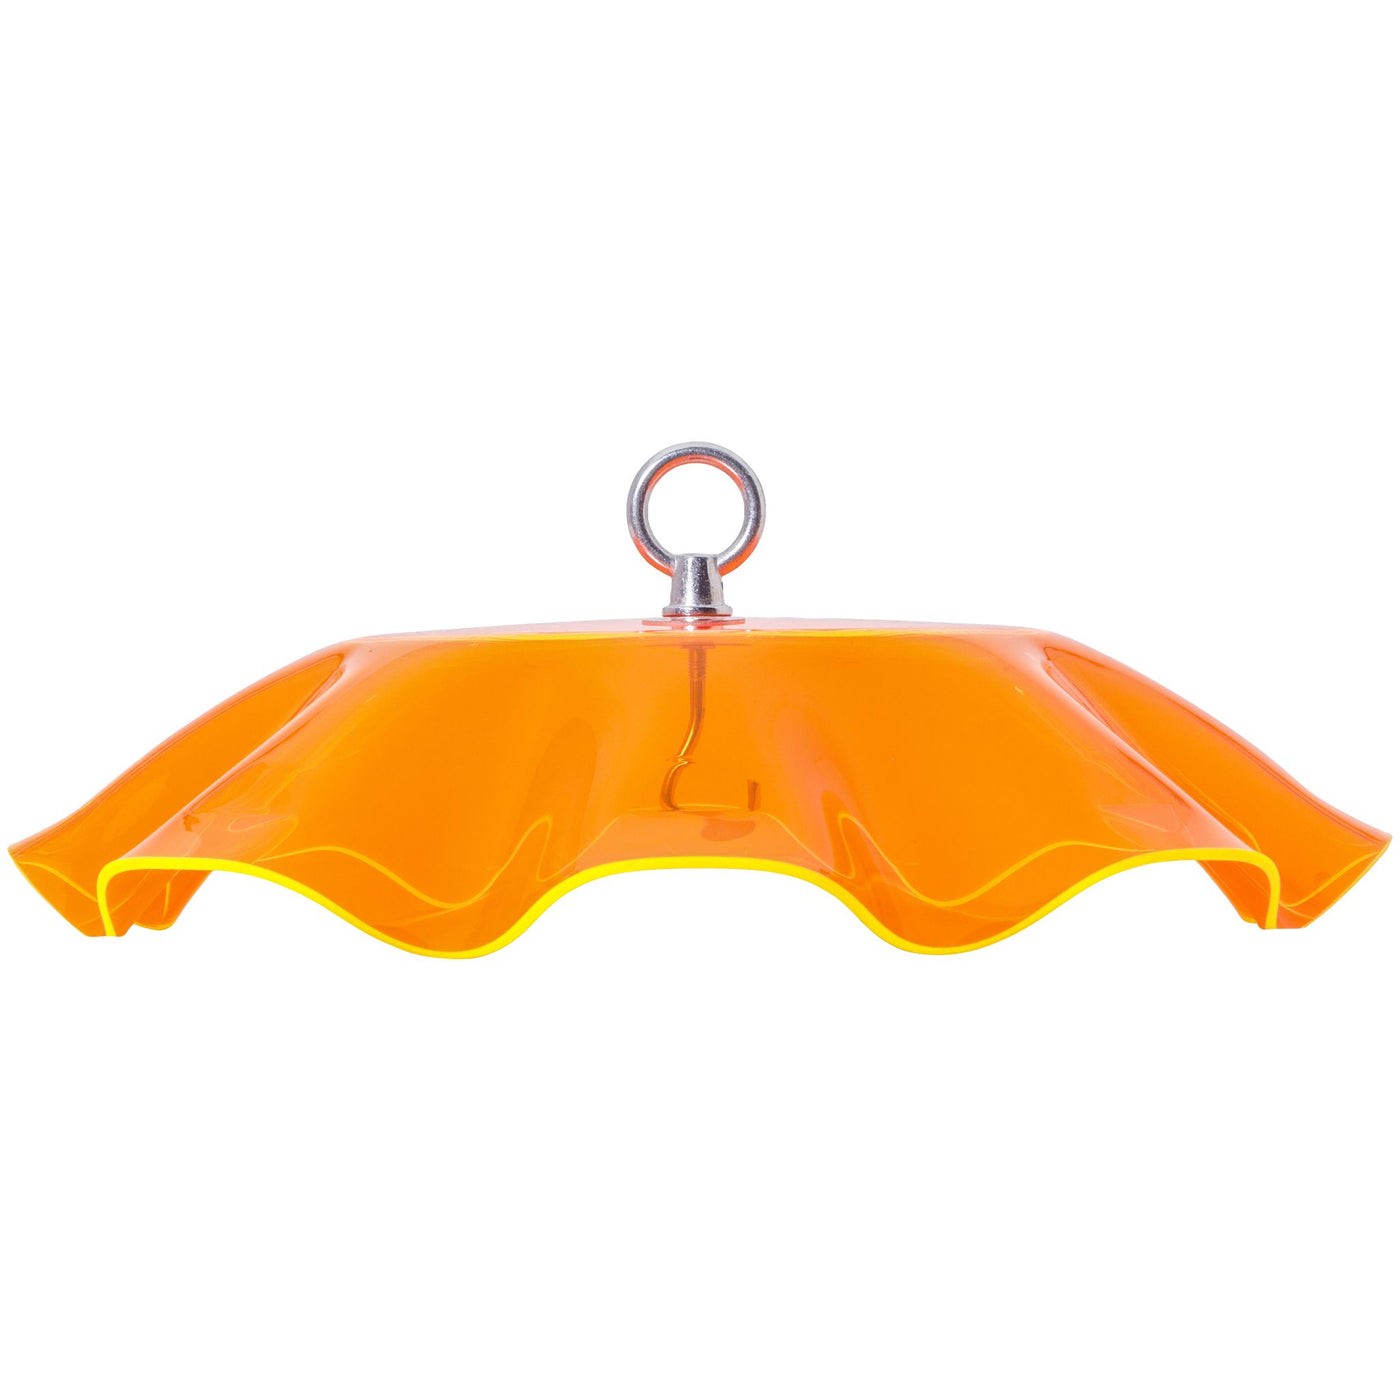 Fluorescent Orange Protective Cover for Hanging Bird Feeder with Scalloped Edges - Birds Choice